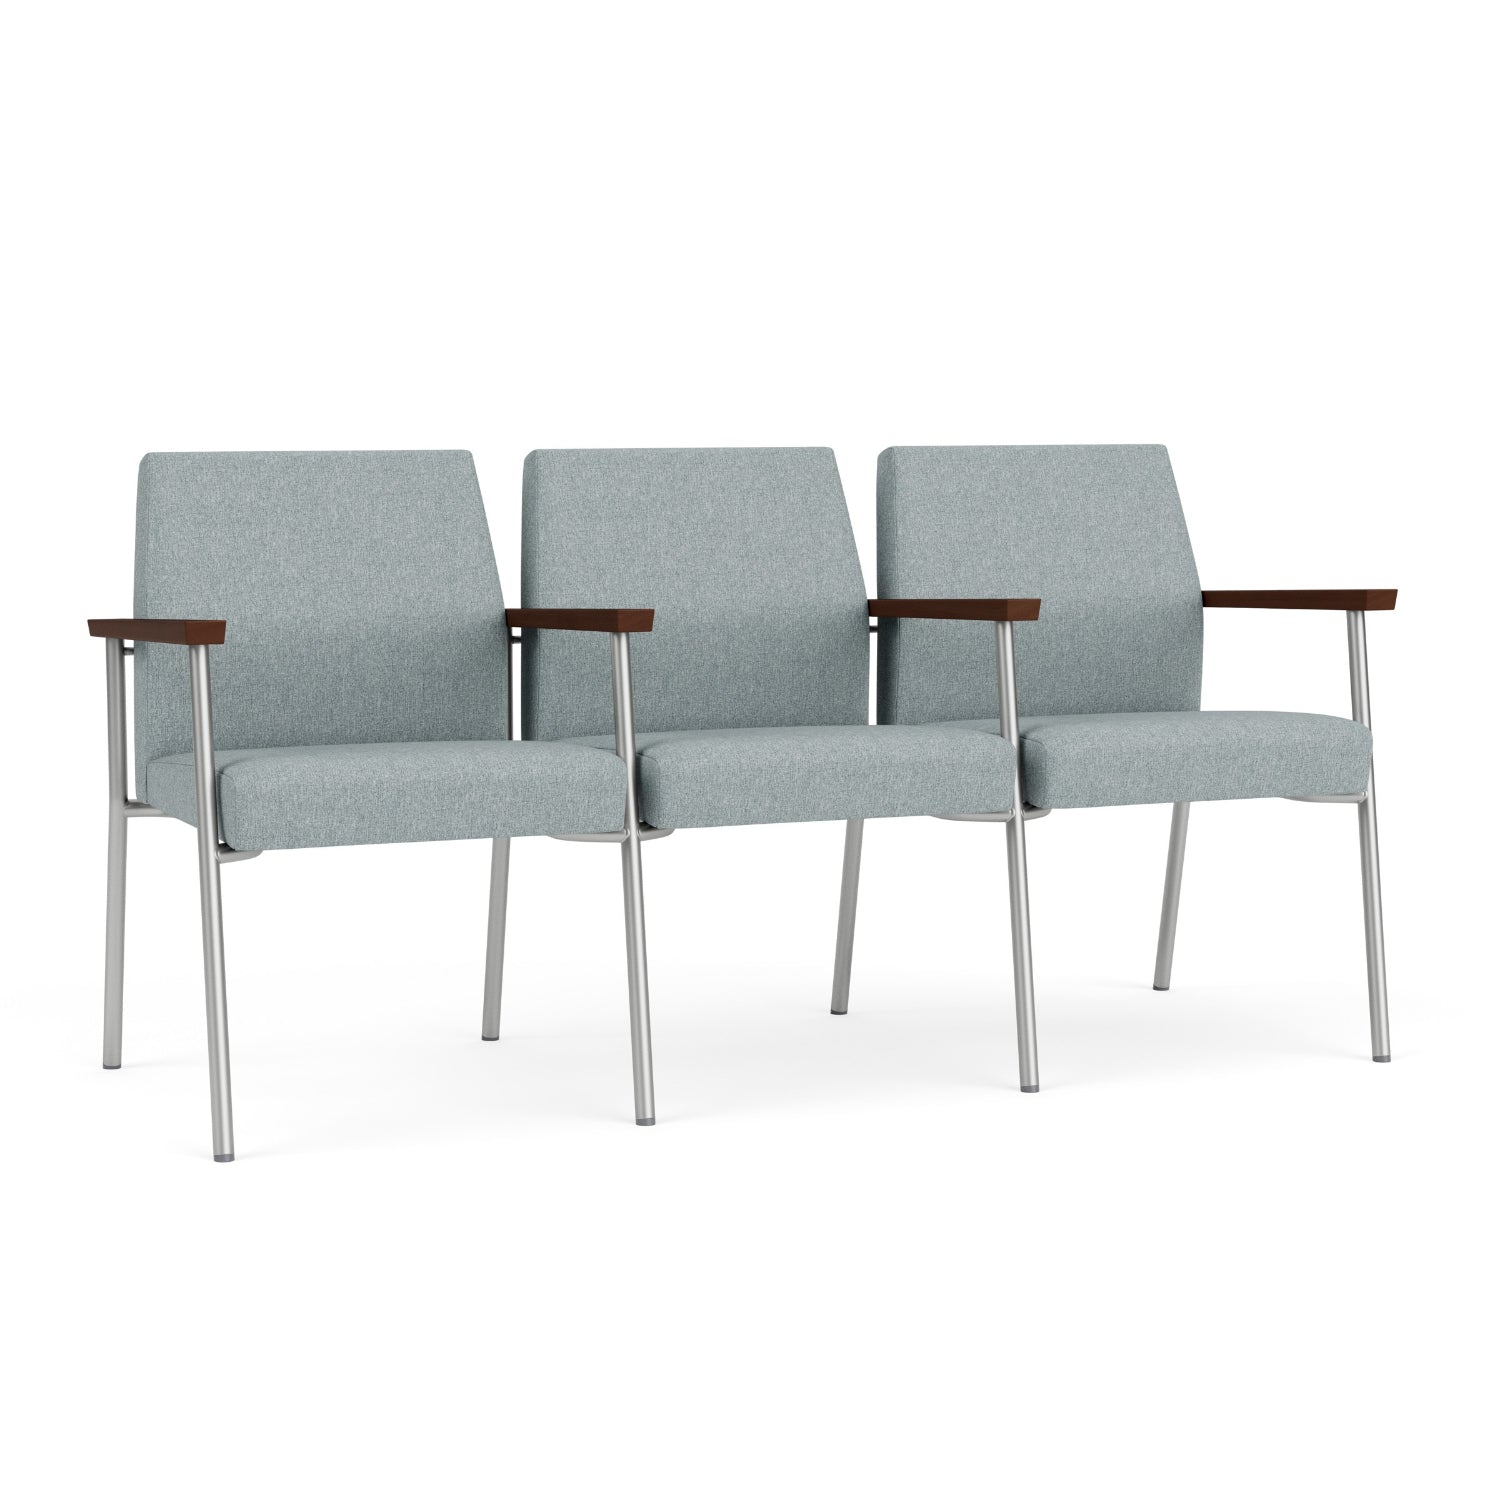 Mystic Guest Collection Reception Seating, 3 Seats with Center Arms, Healthcare Vinyl Upholstery, FREE SHIPPING